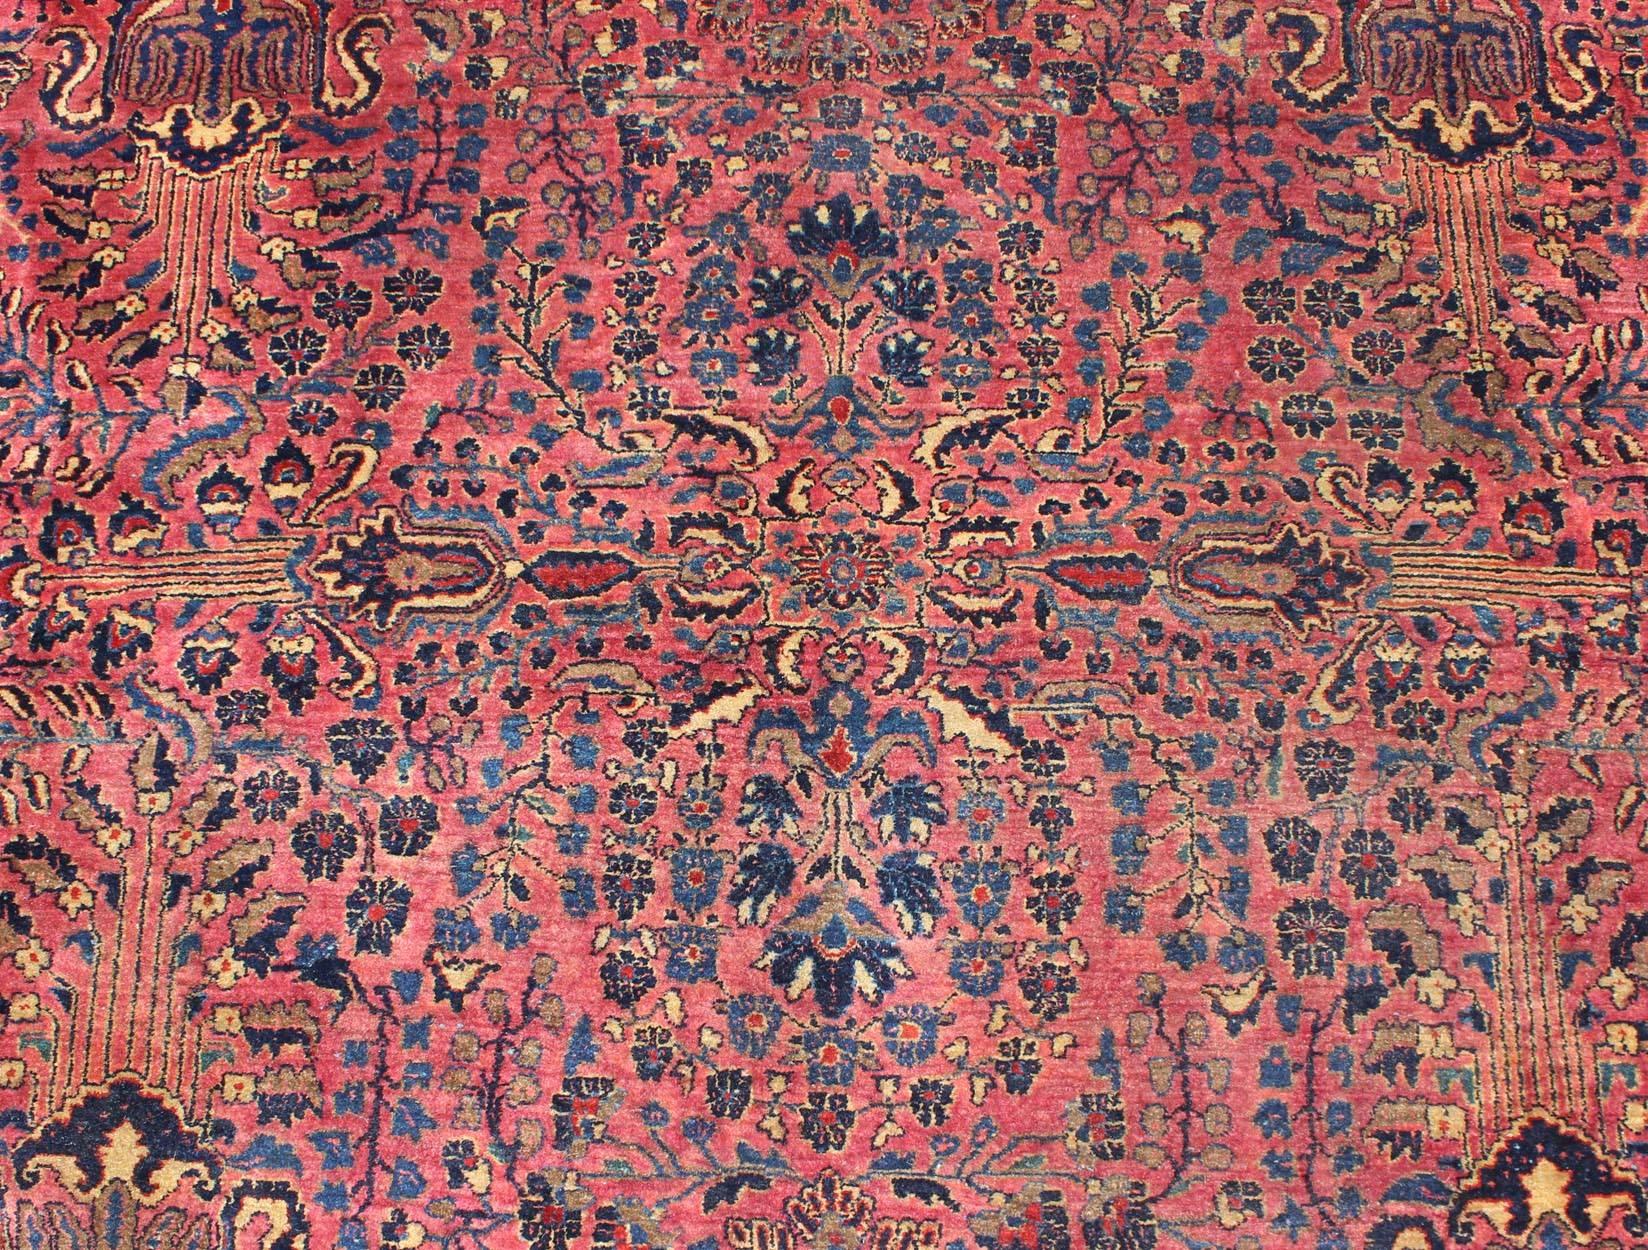 20th Century Antique Persian Sarouk Carpet with Deep Cranberry Field and Floral Elements